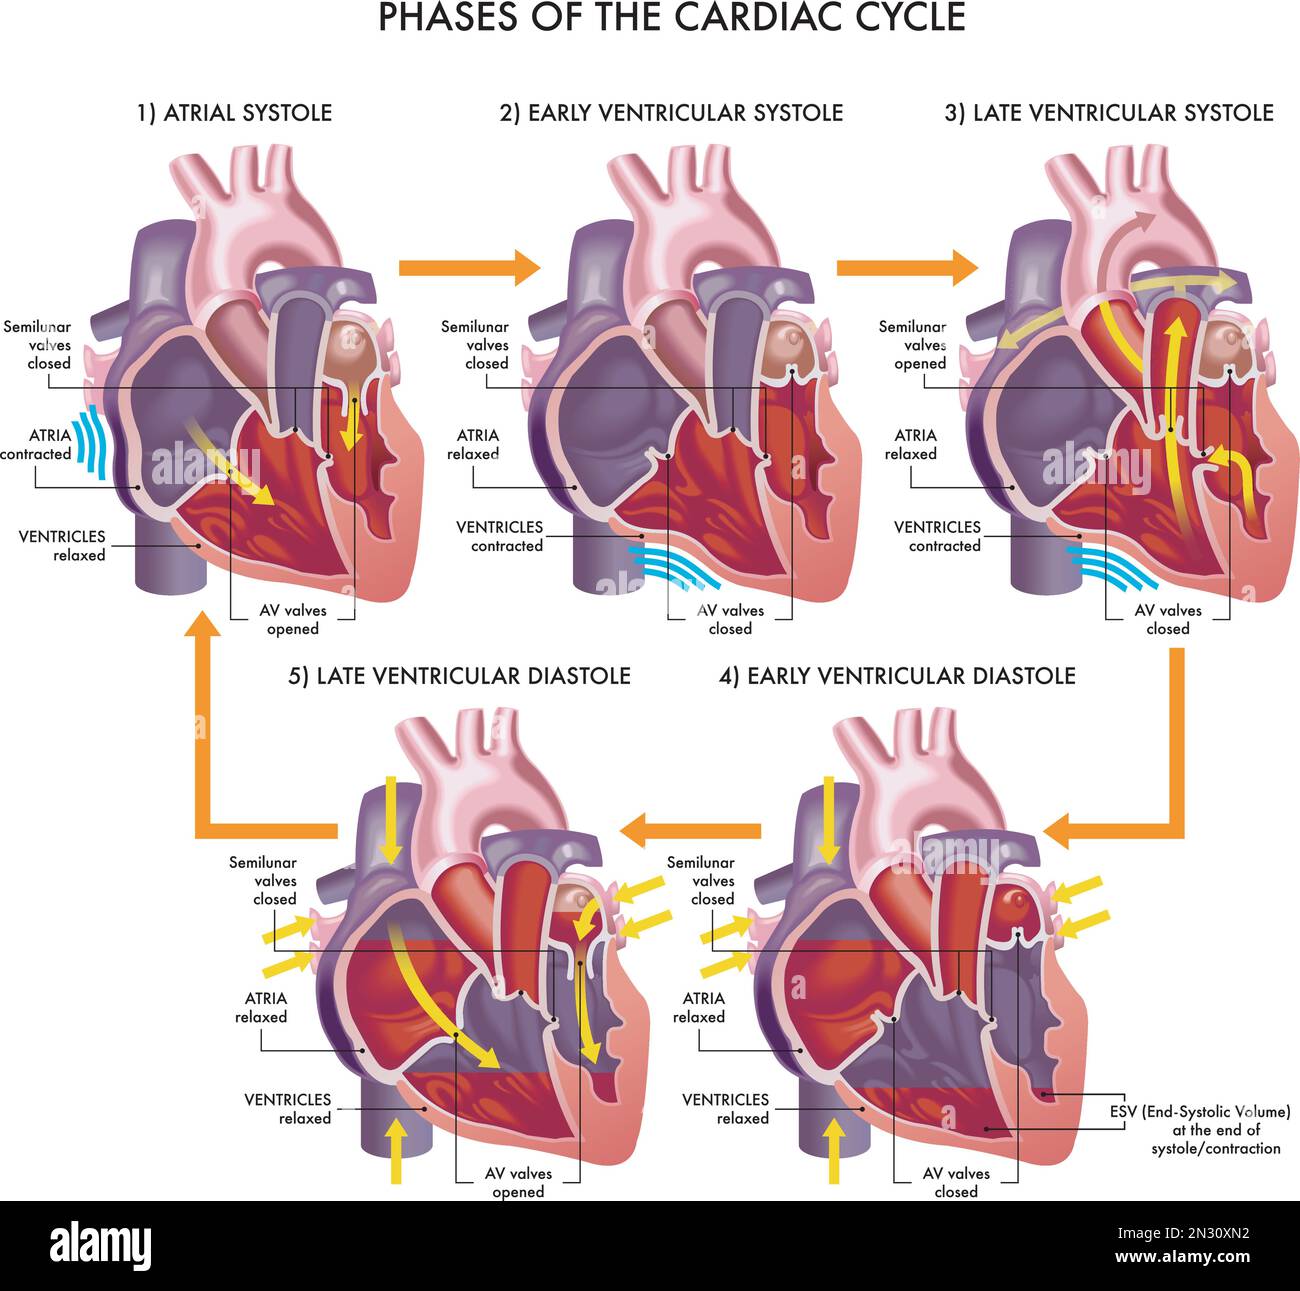 Medical illustration of the phases of the cardiac cycle, with annotations. Stock Vector